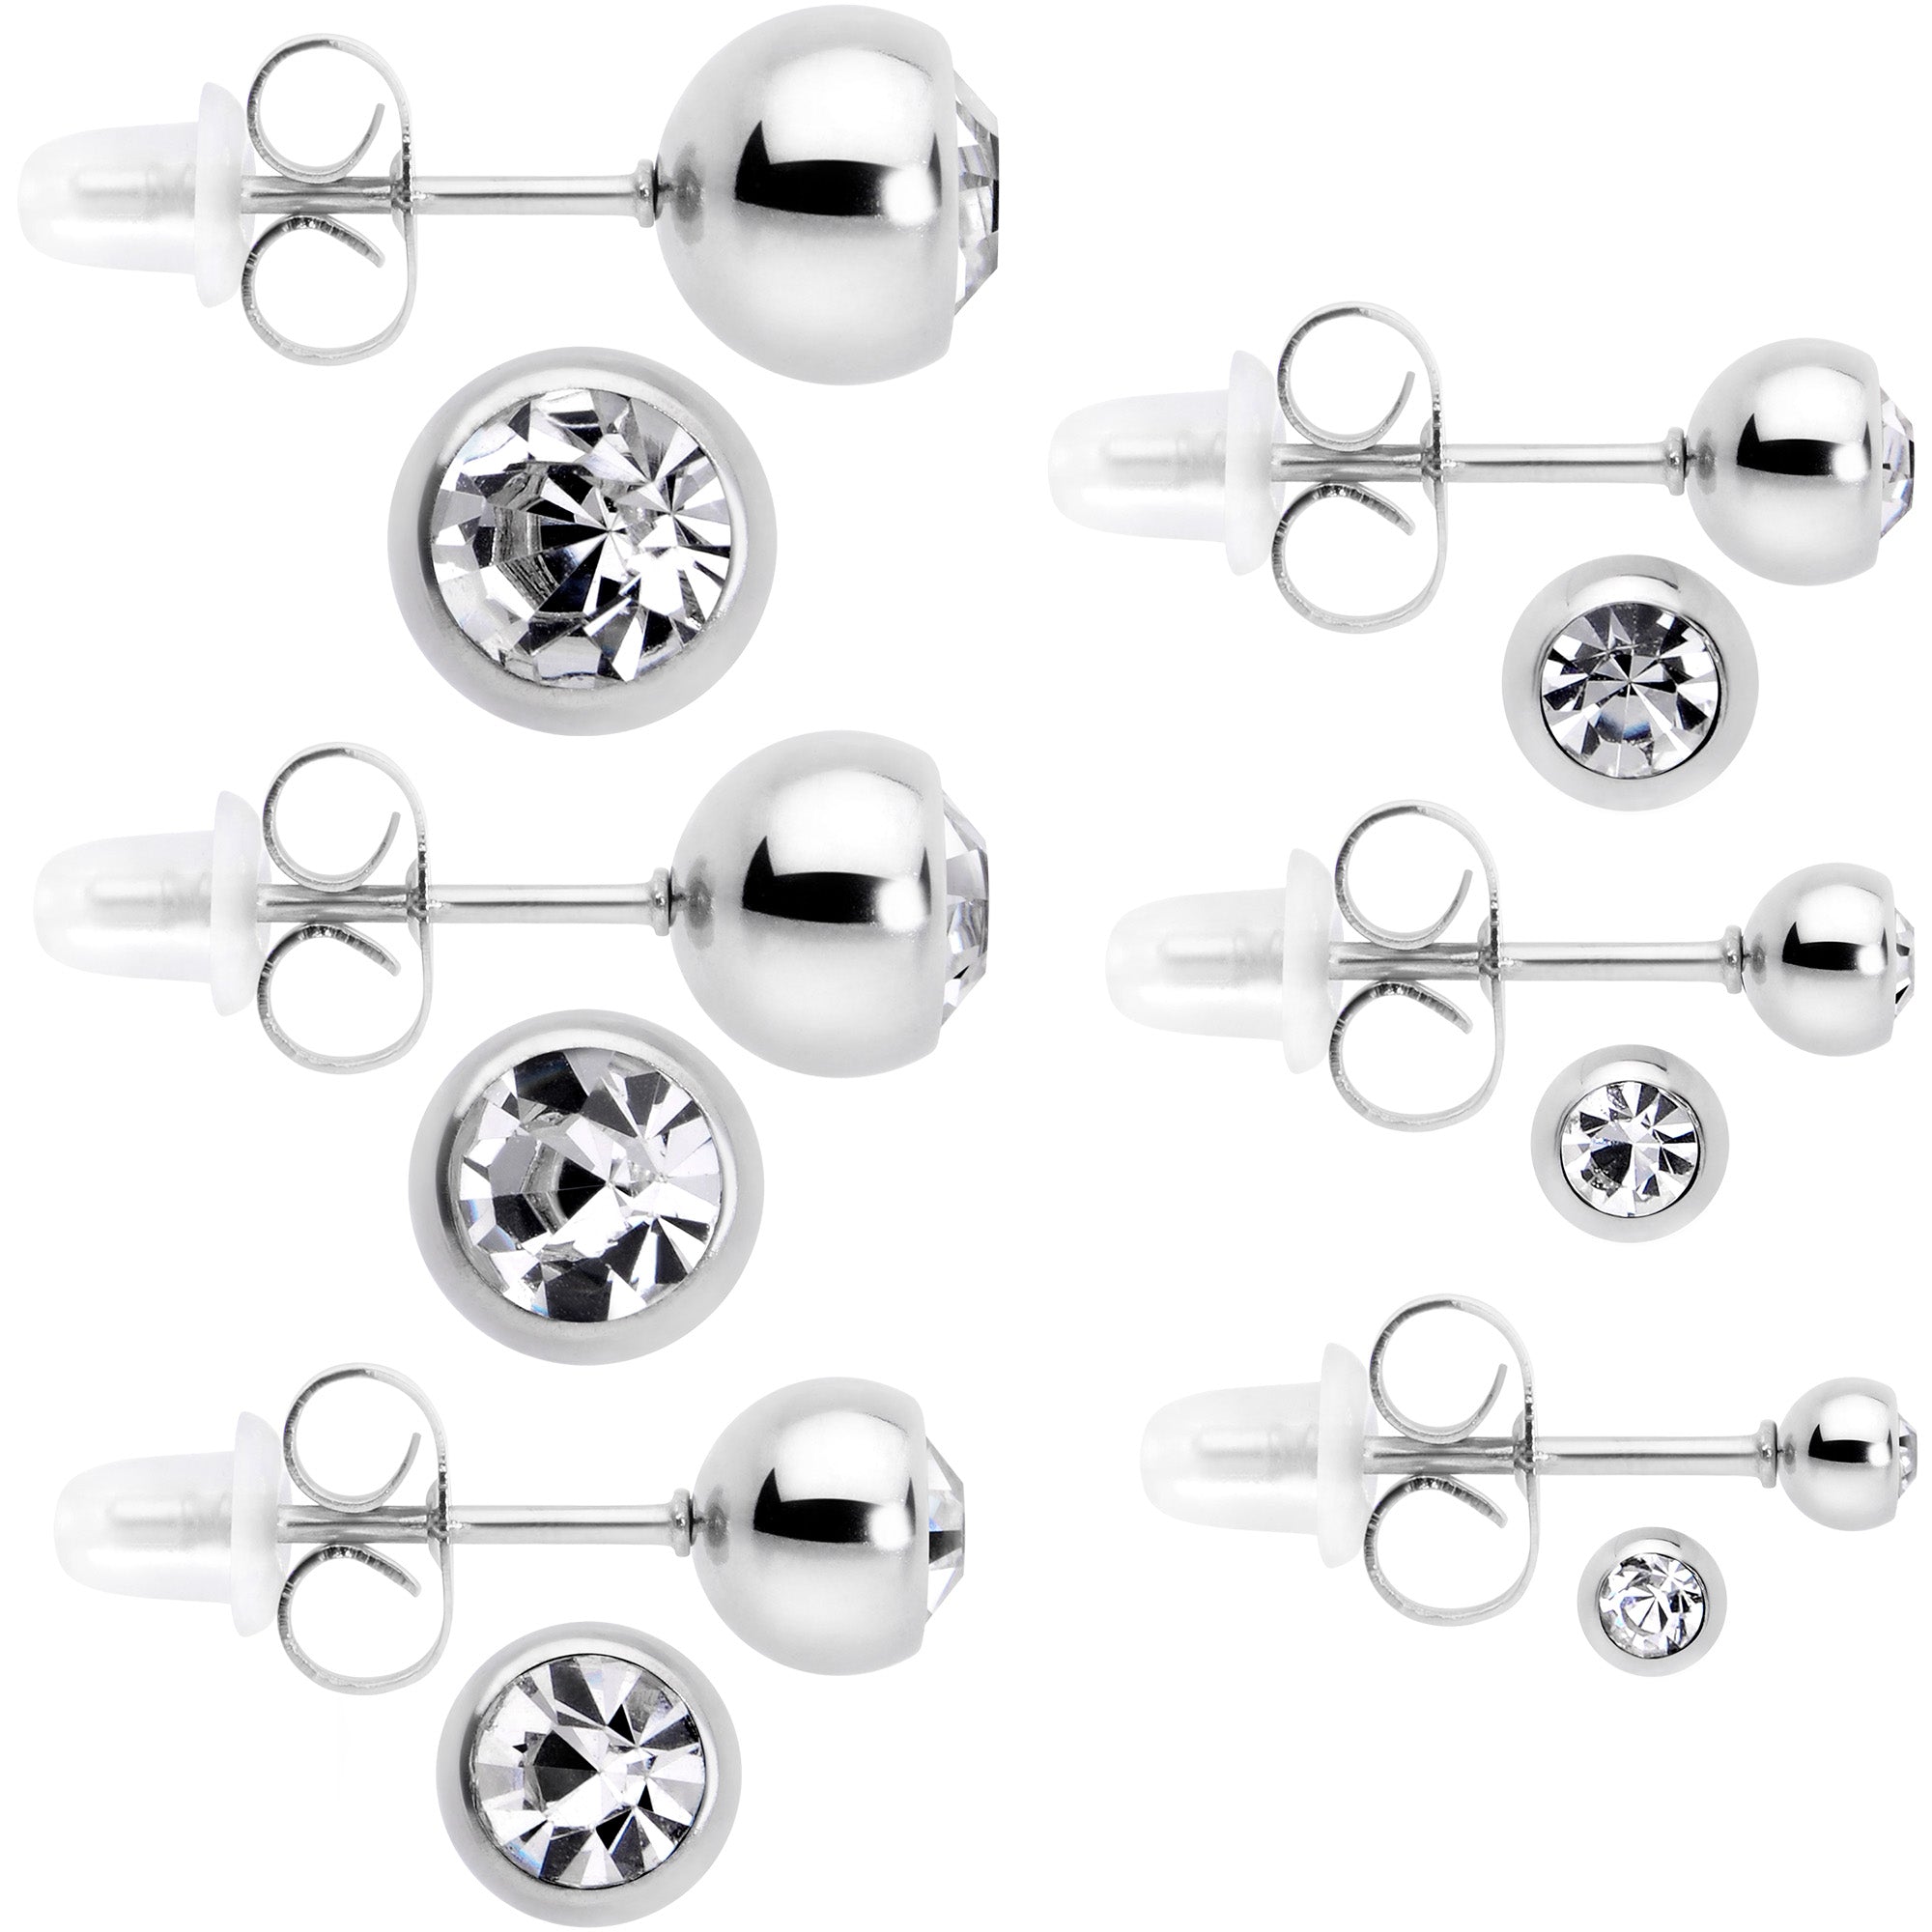 Clear Gem 3mm to 8mm Ball End Stud Earrings Set of 6